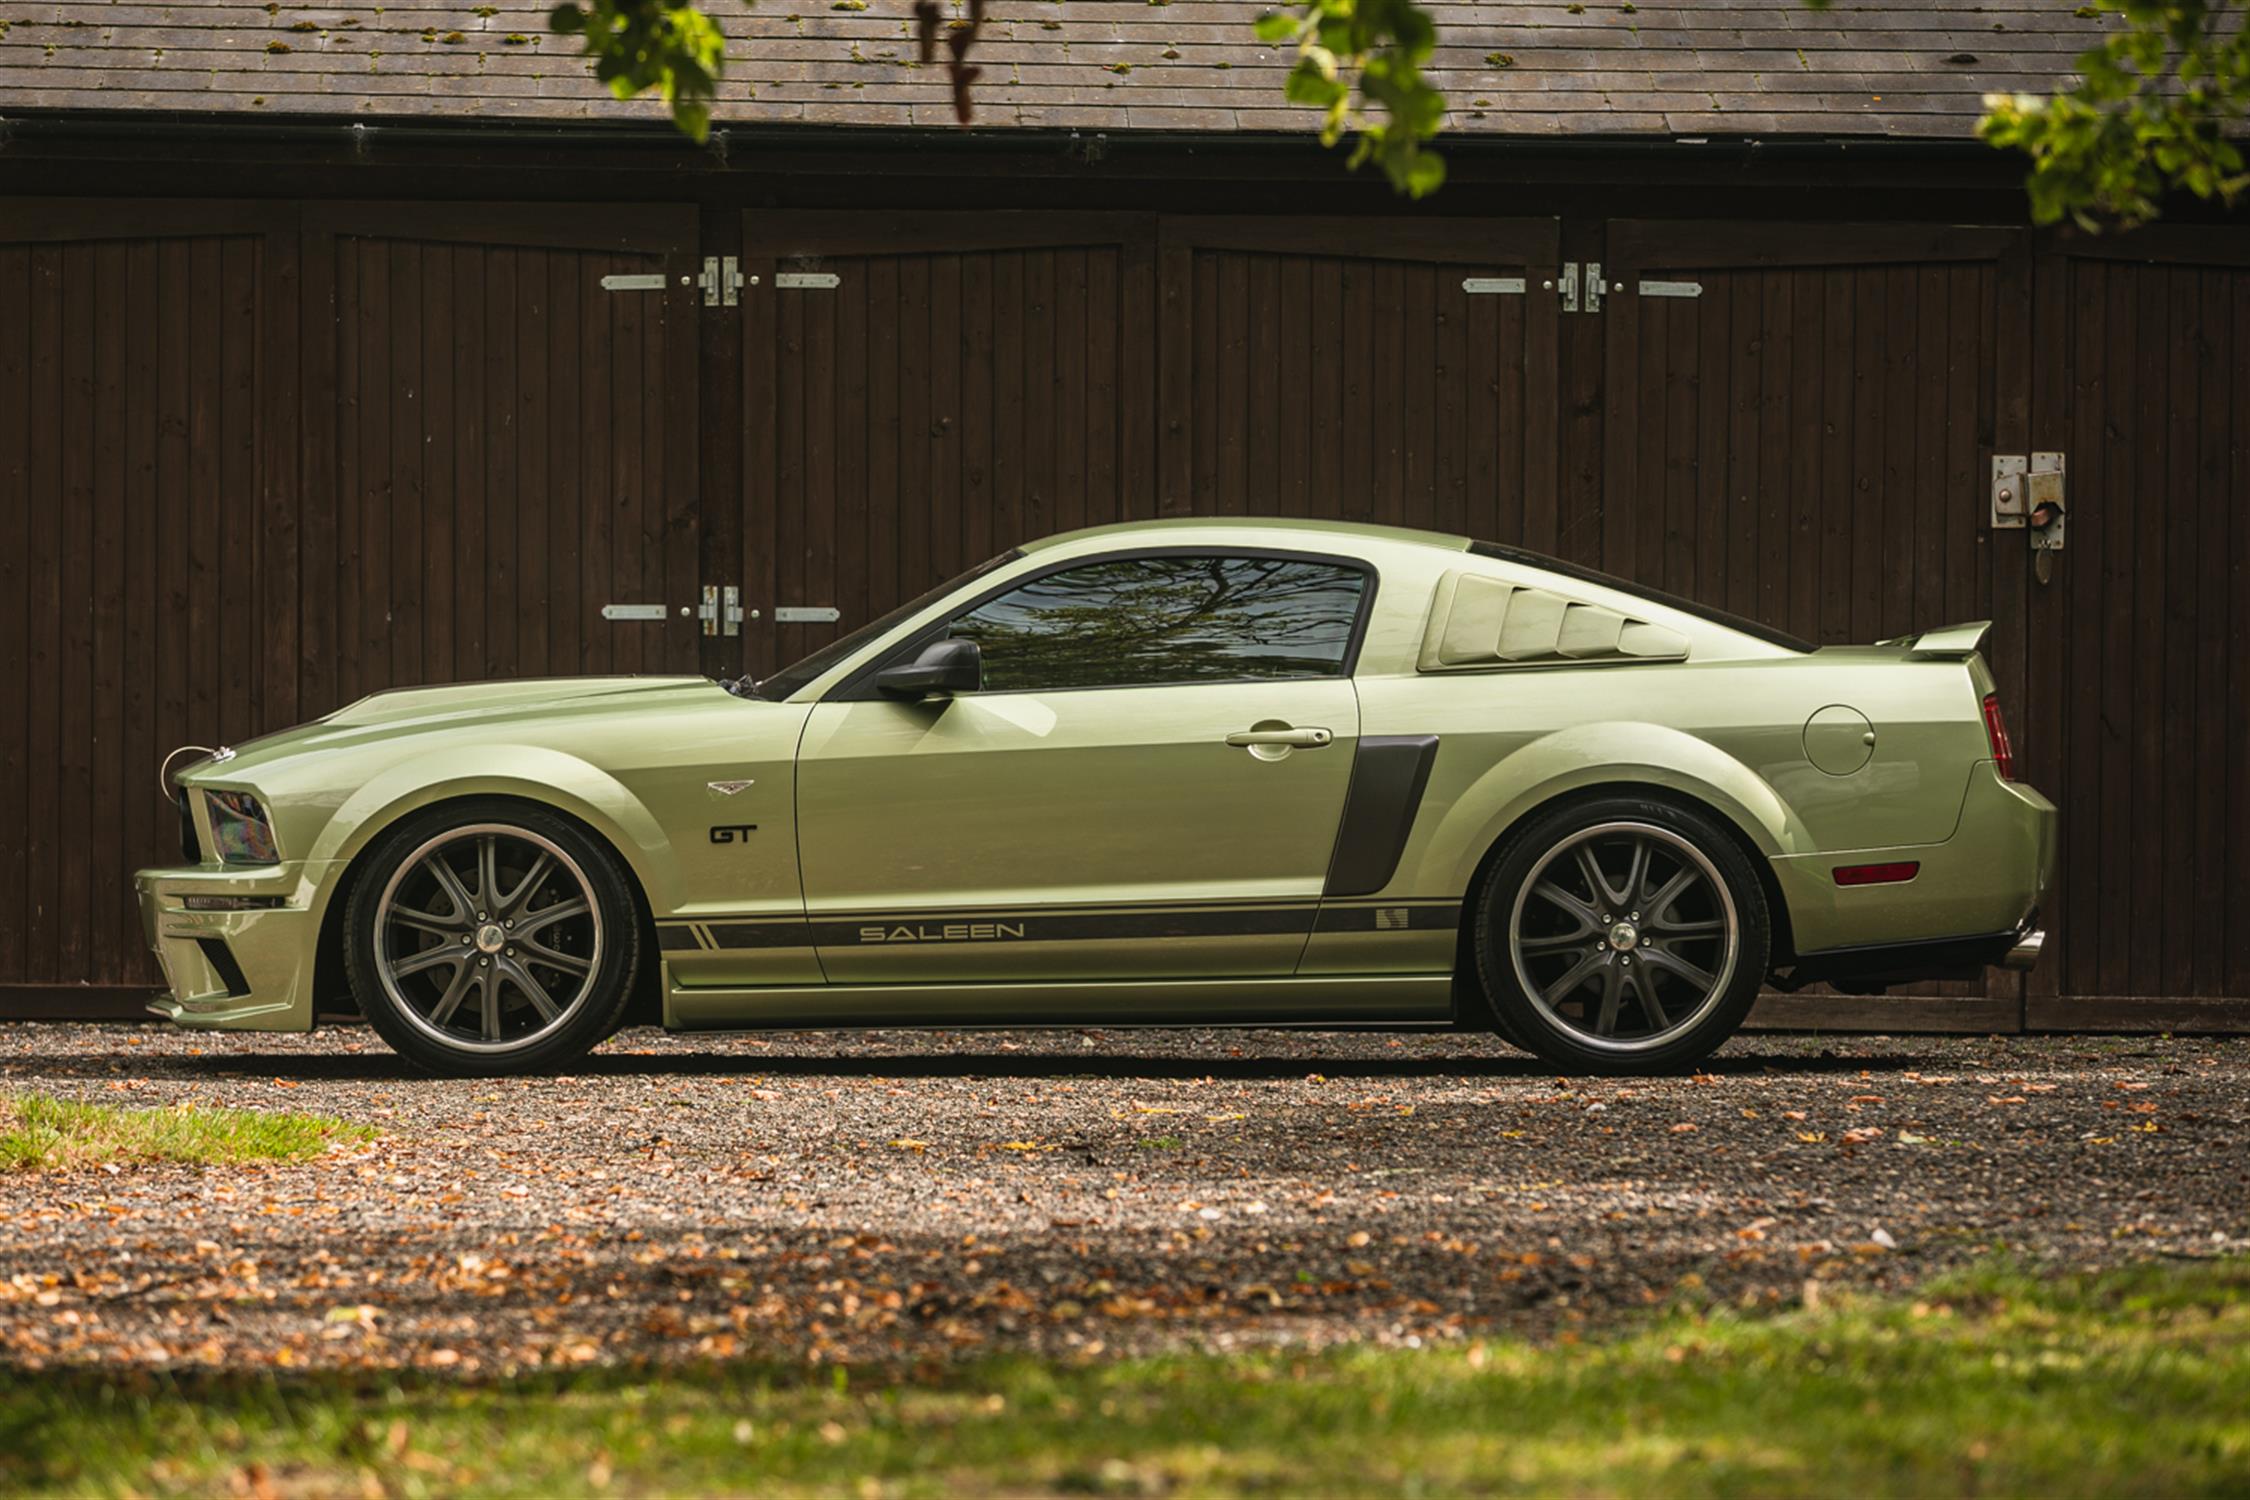 2005 Ford Mustang GT Premium Supercharged 4.6-Litre V8 Manual Saleen-homage - Image 5 of 10